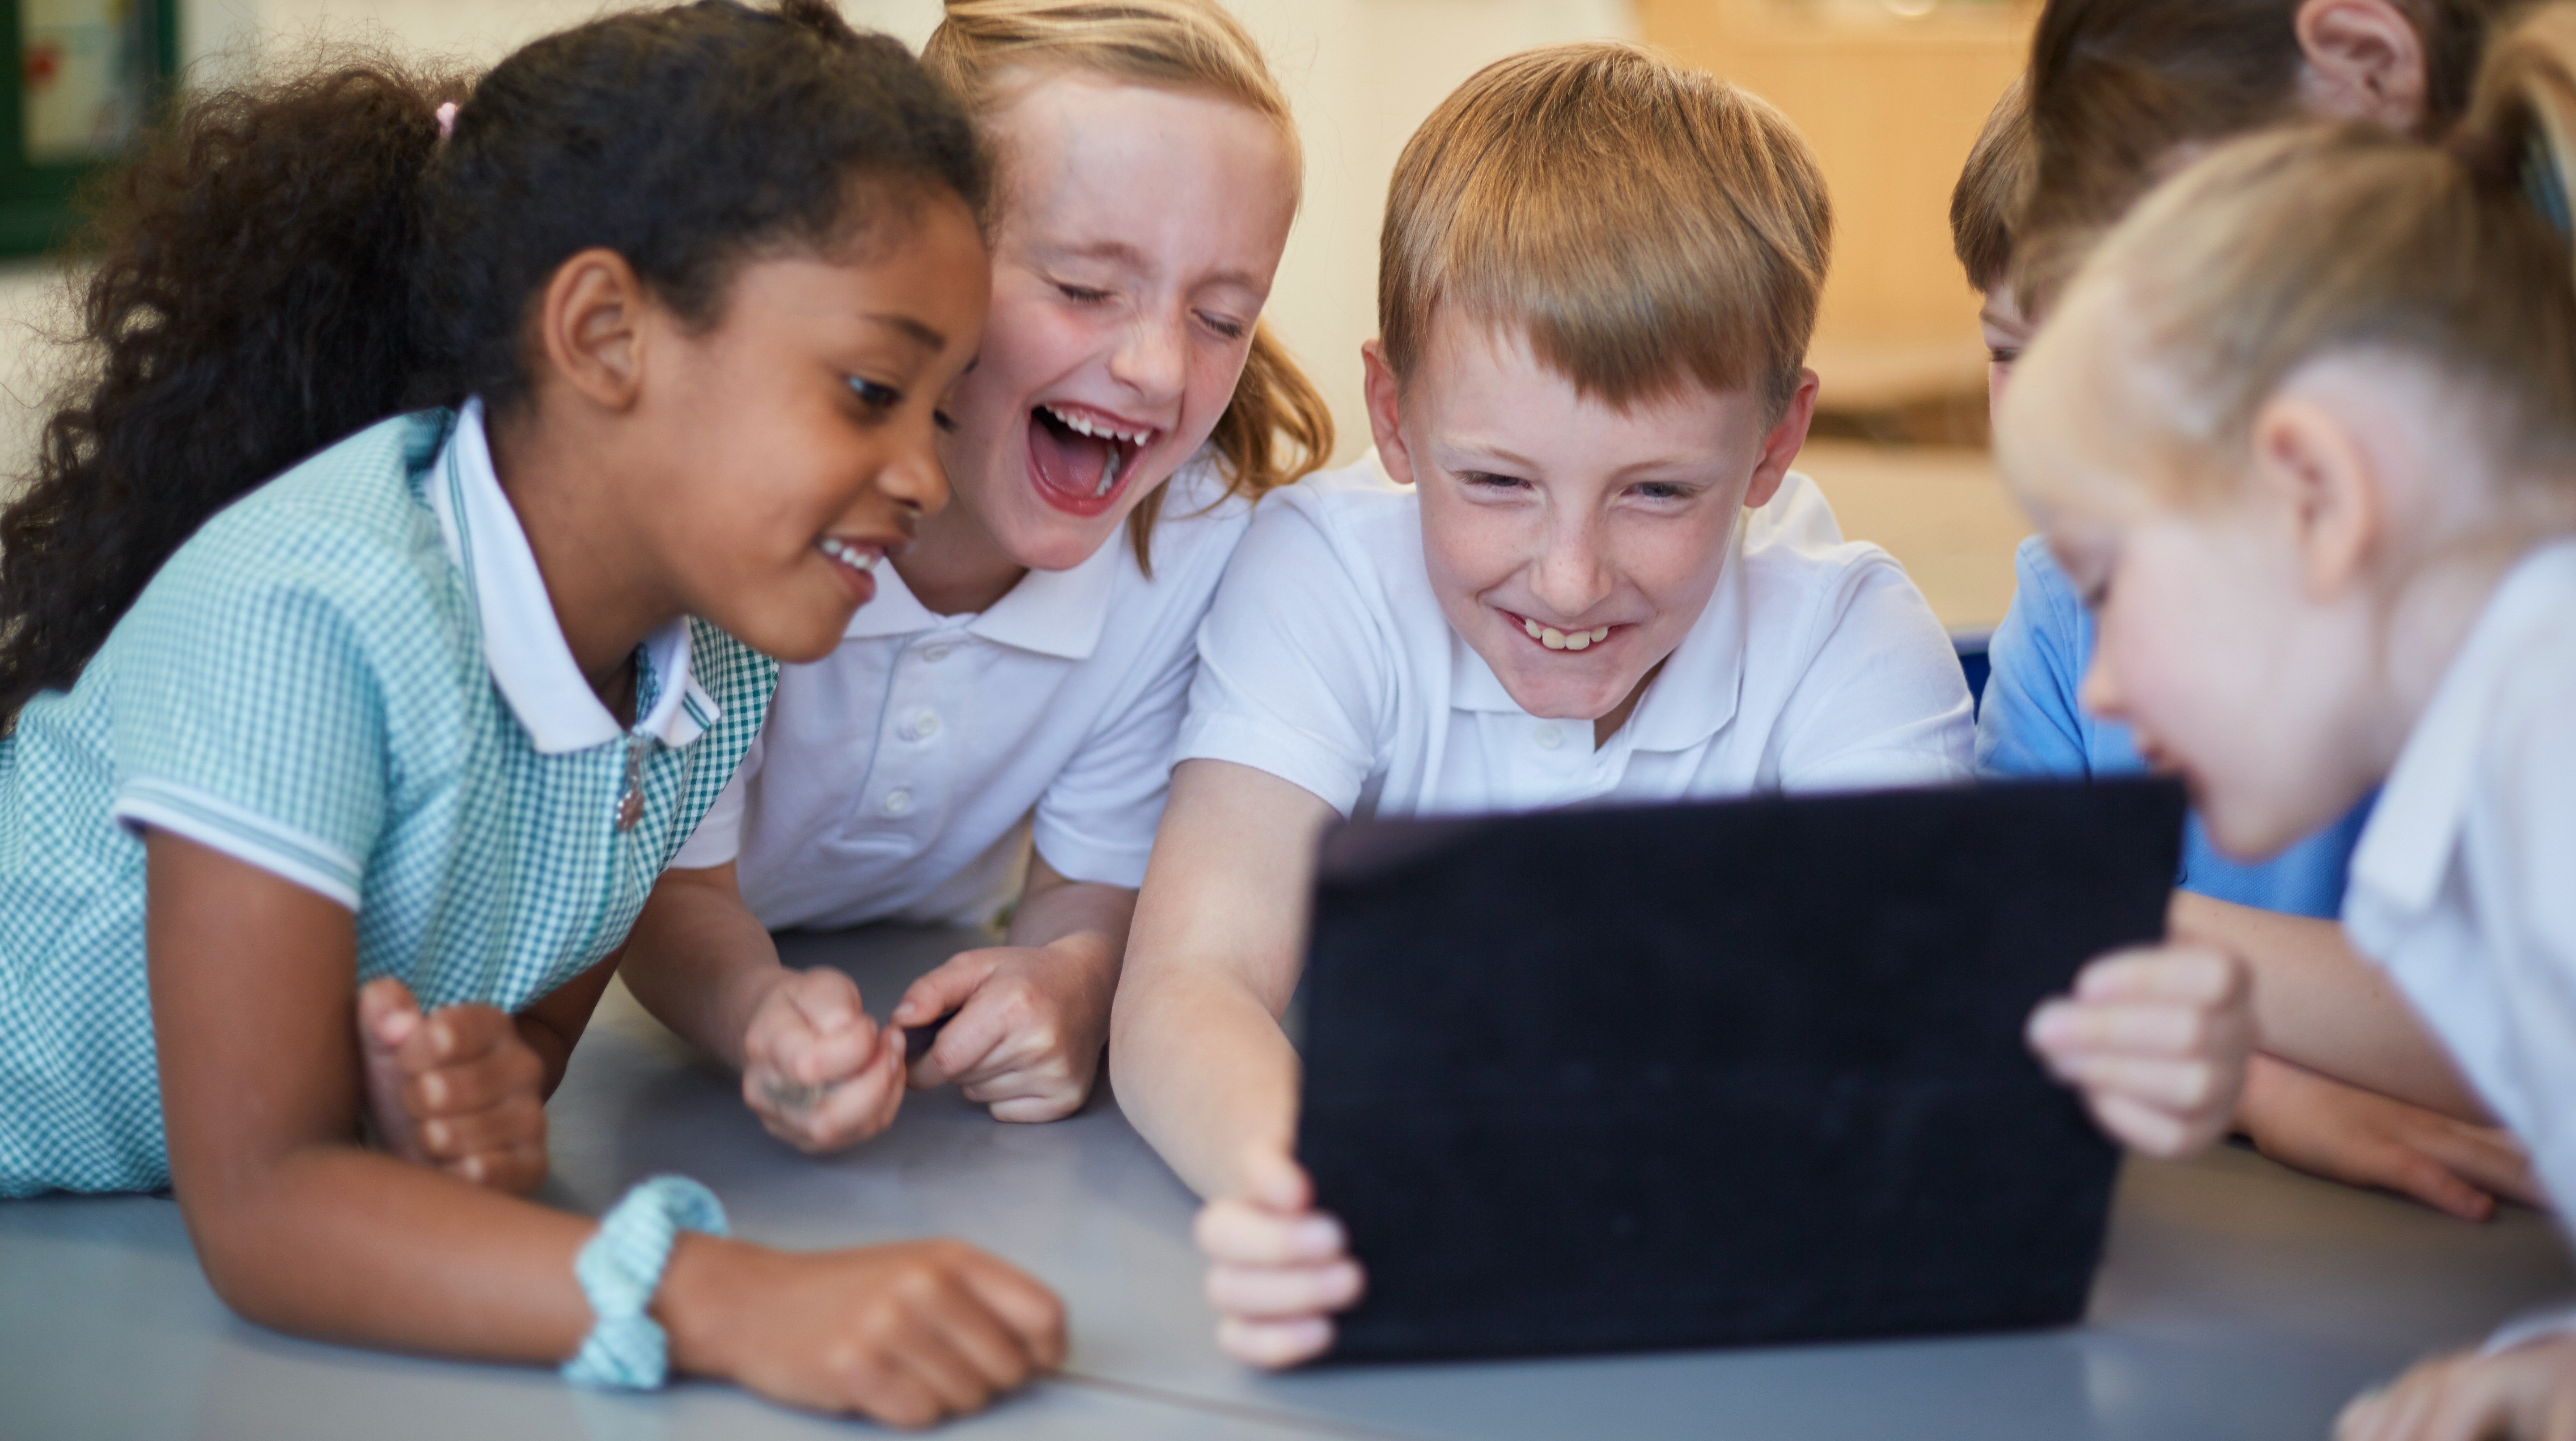 schoolboys-and-girls-laughing-at-digital-tablet-in-2022-03-04-01-52-01-utc